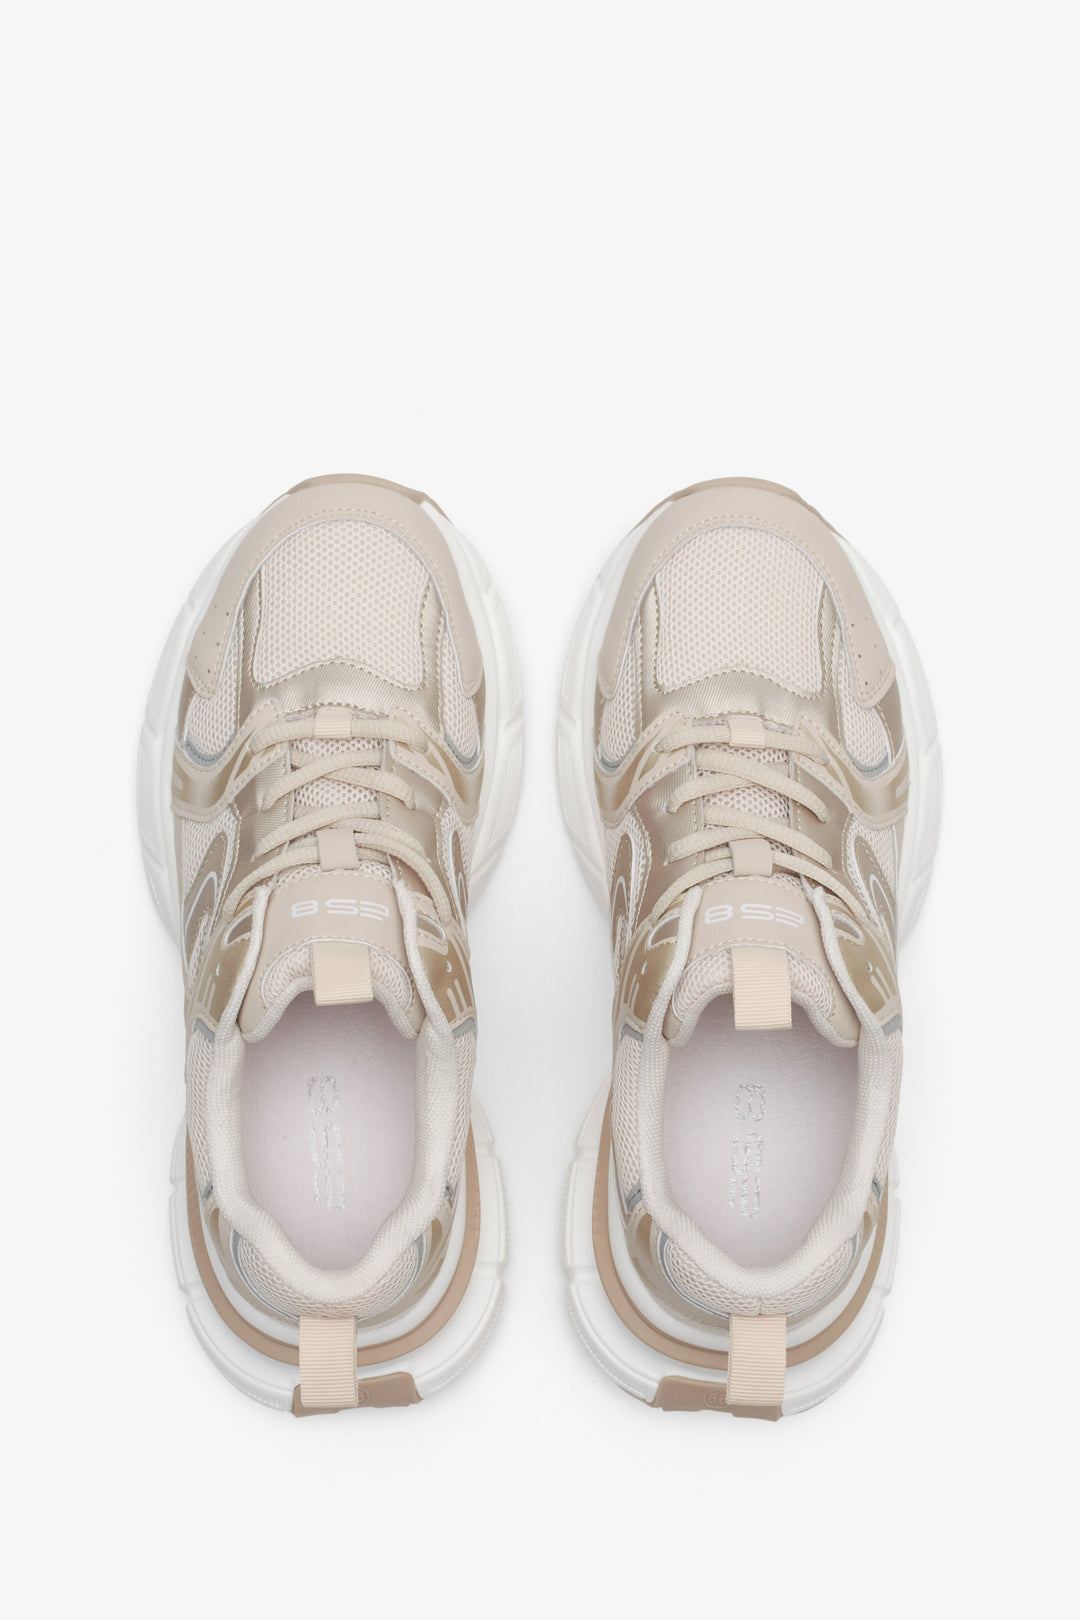 Women's beige and white sneakers with mesh ES 8 - top view presentation of the model.